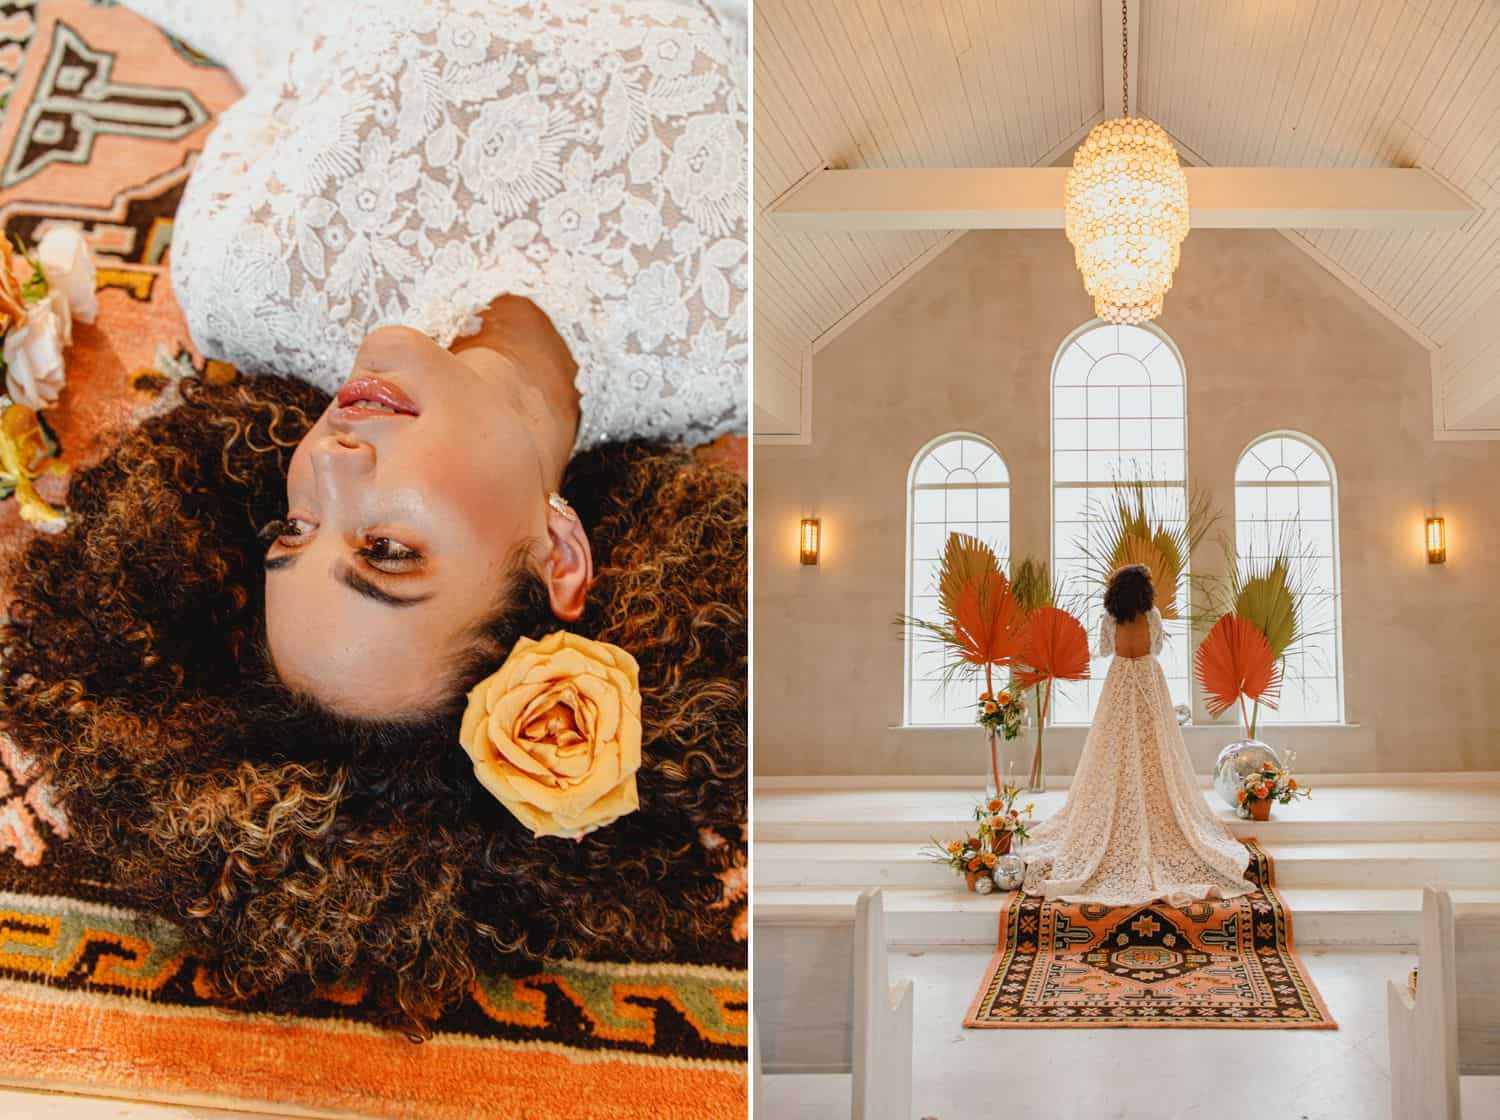 A bride with a yellow rose in her hair lies on a Moroccan rug and poses before large windows.